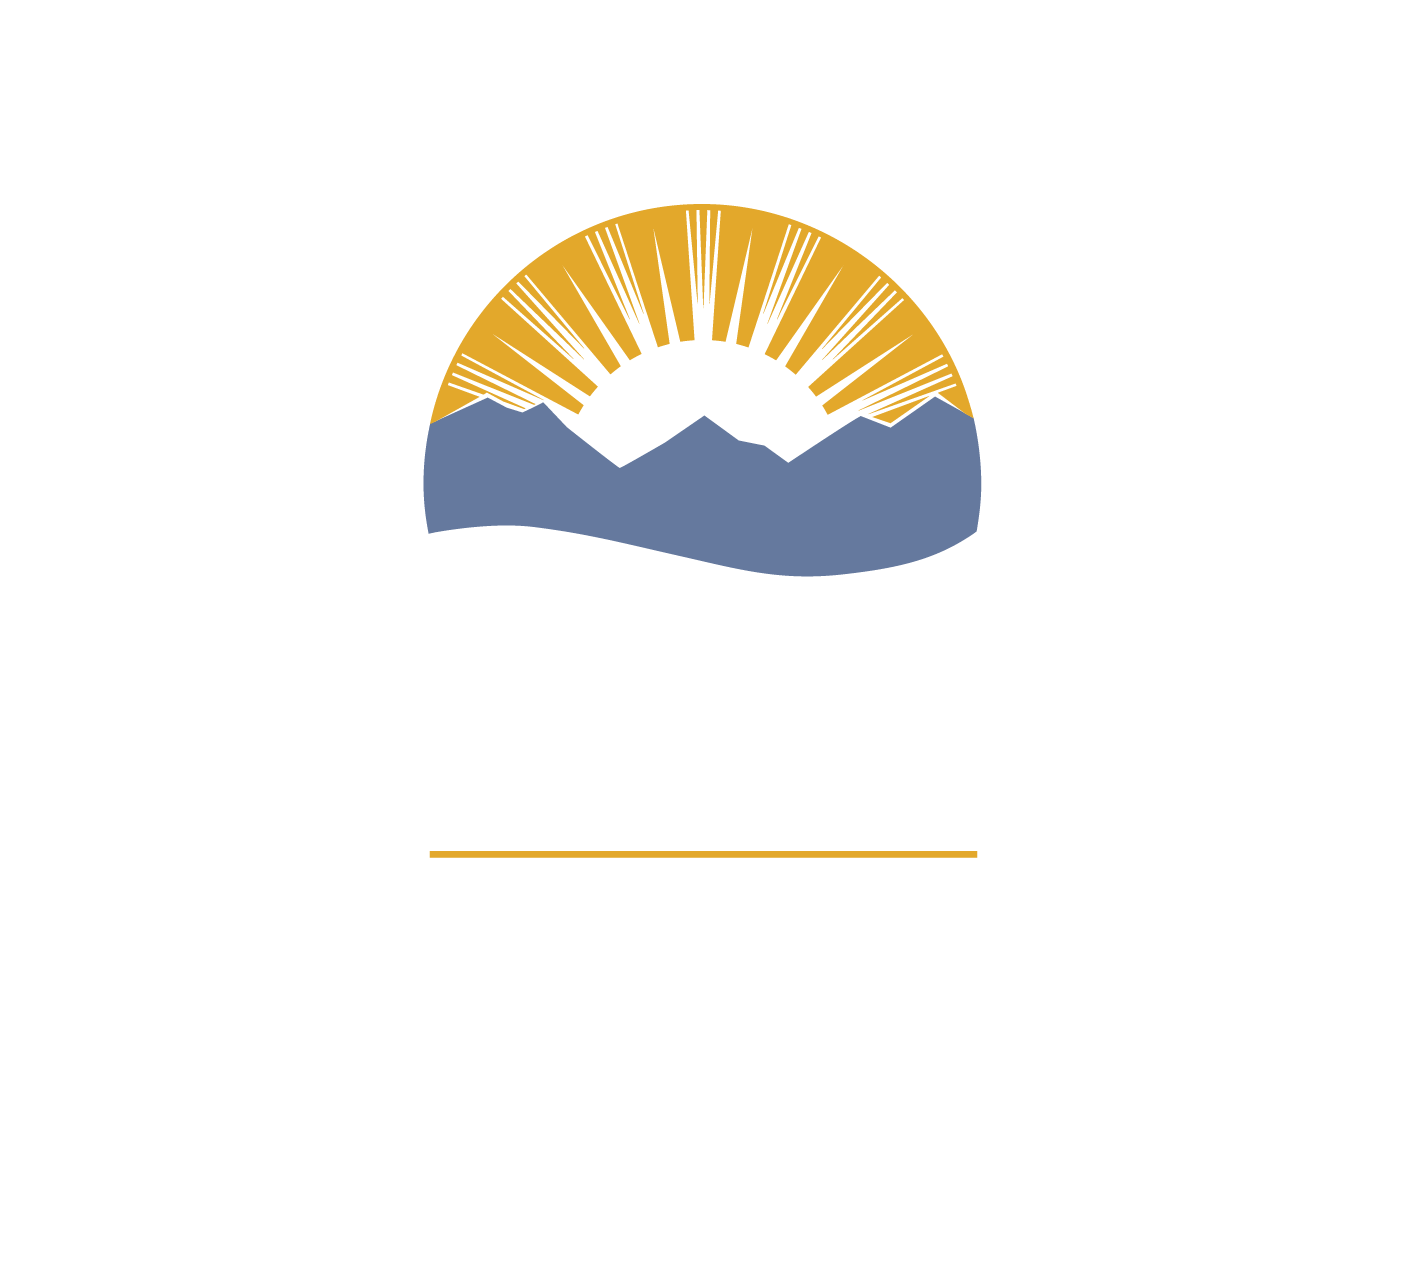 Supported by the Province of British Columbia